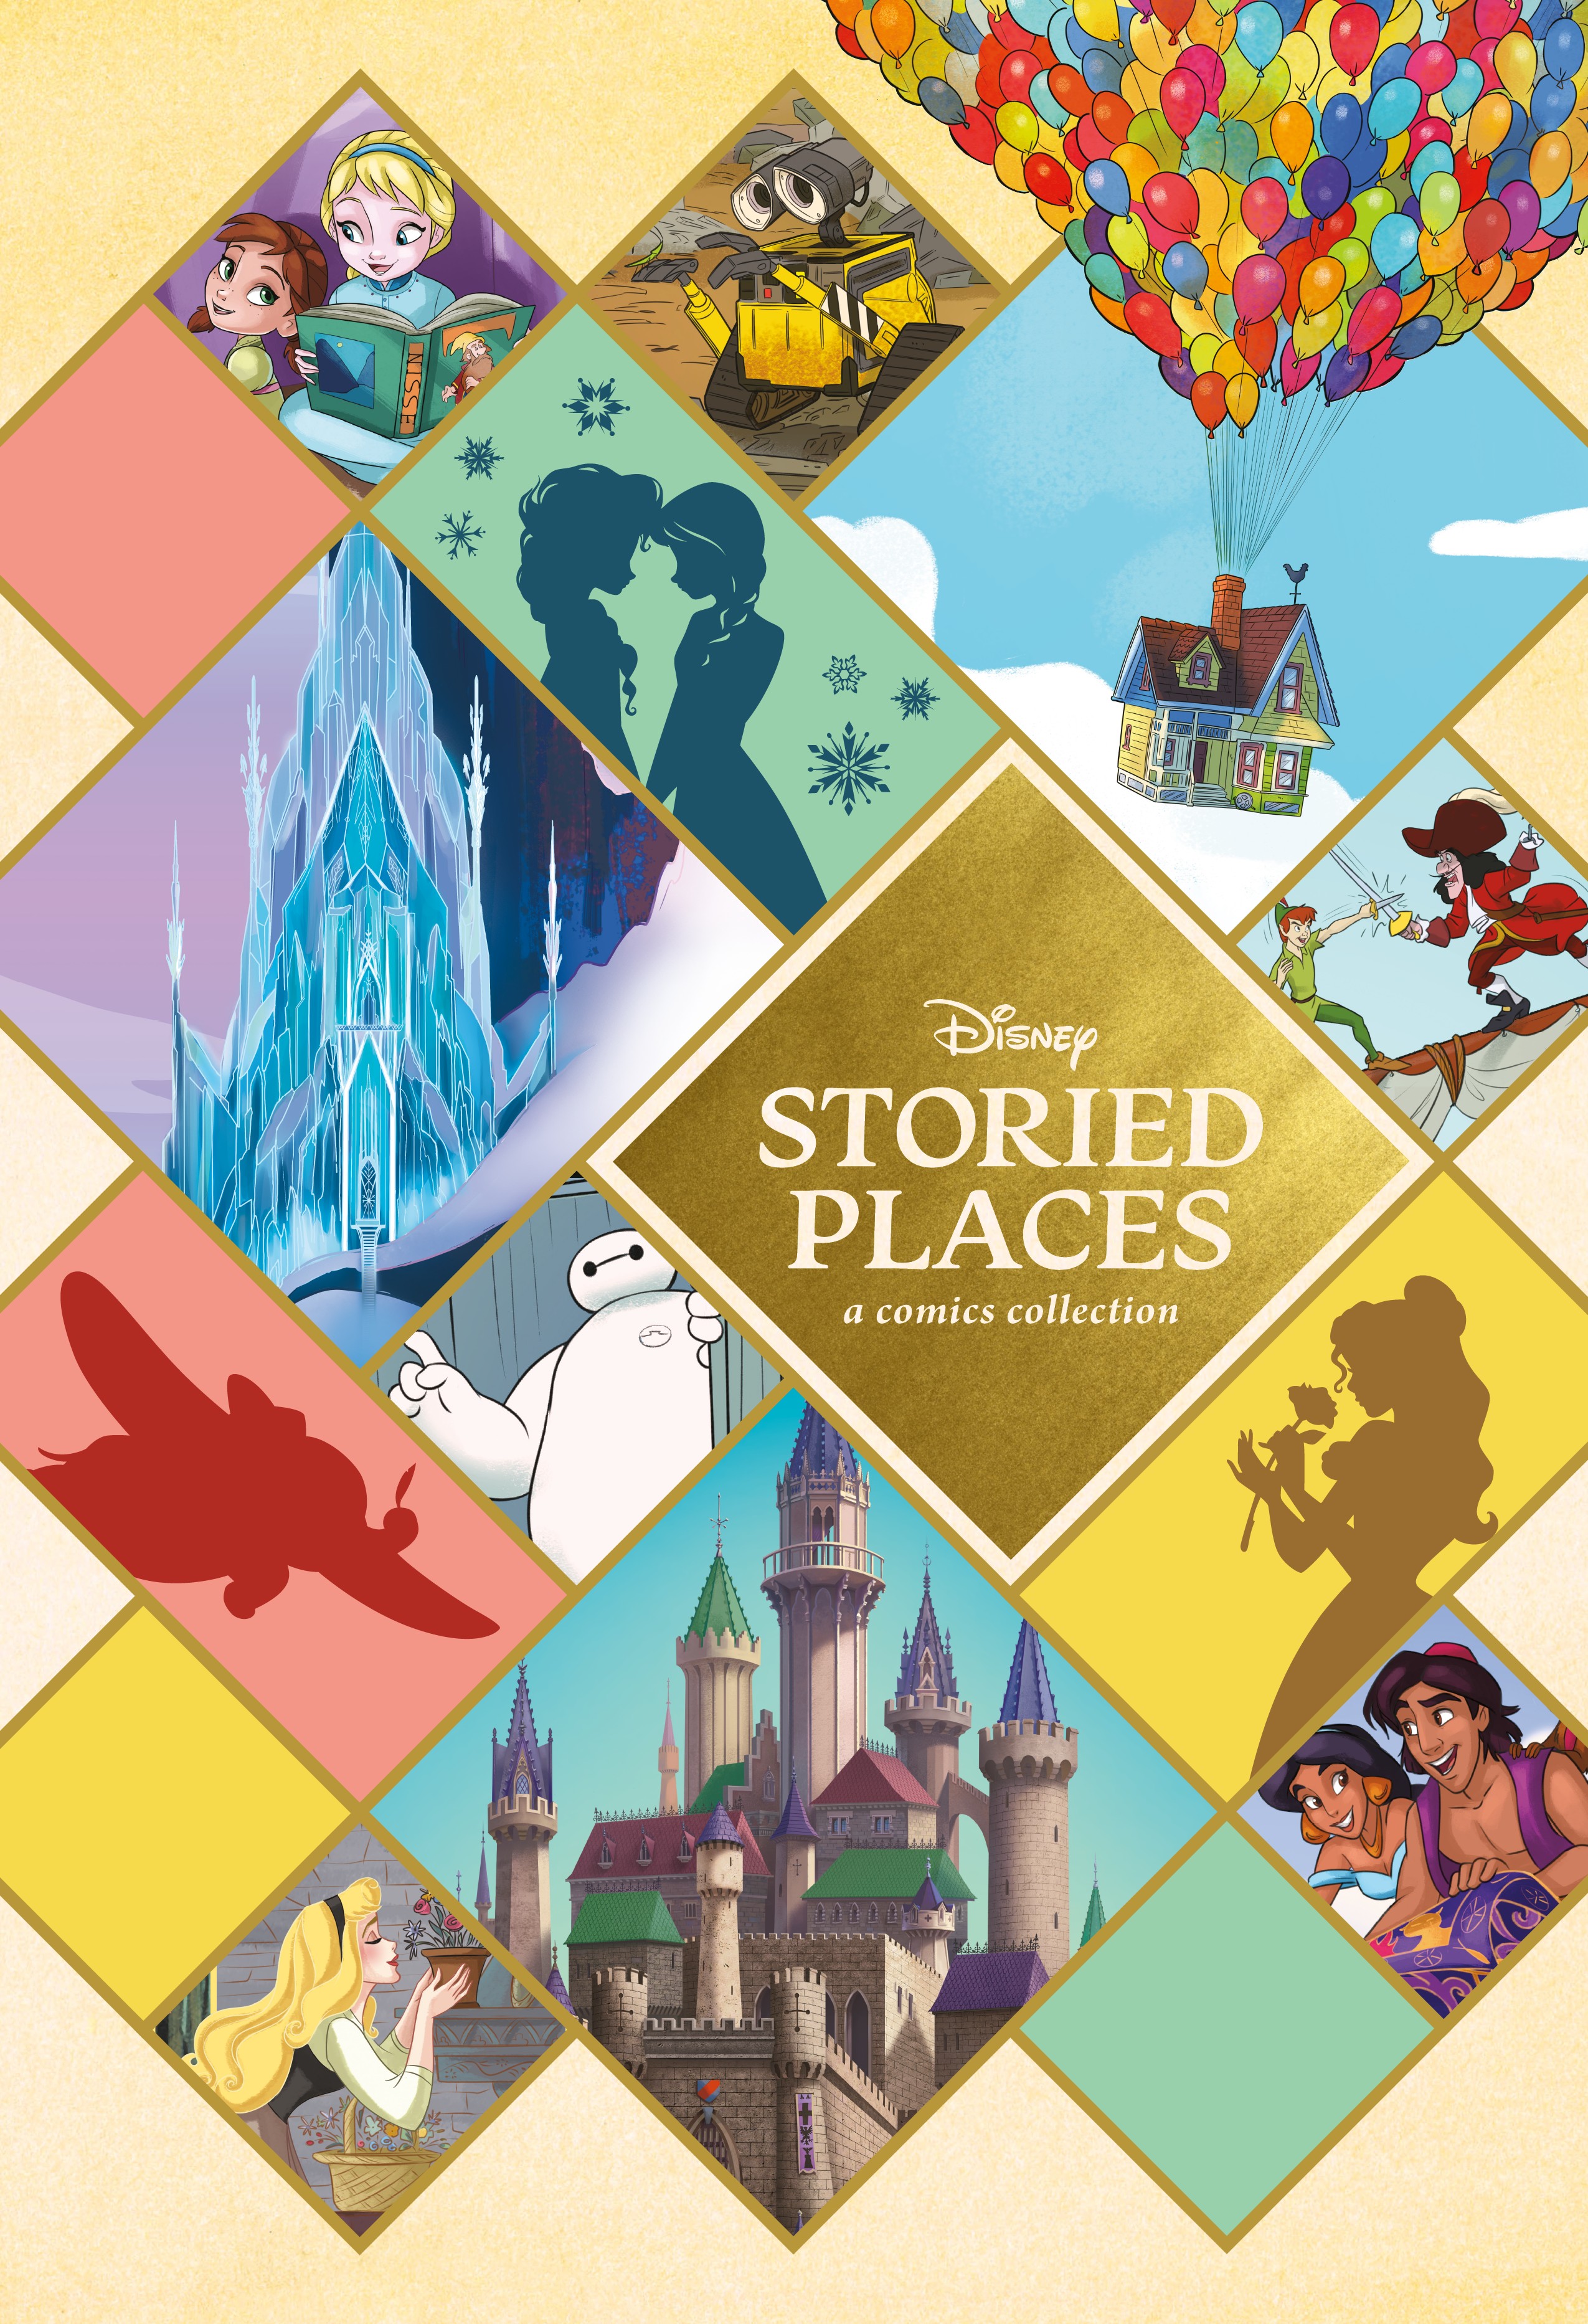 Read online Disney Storied Places comic -  Issue # TPB - 1